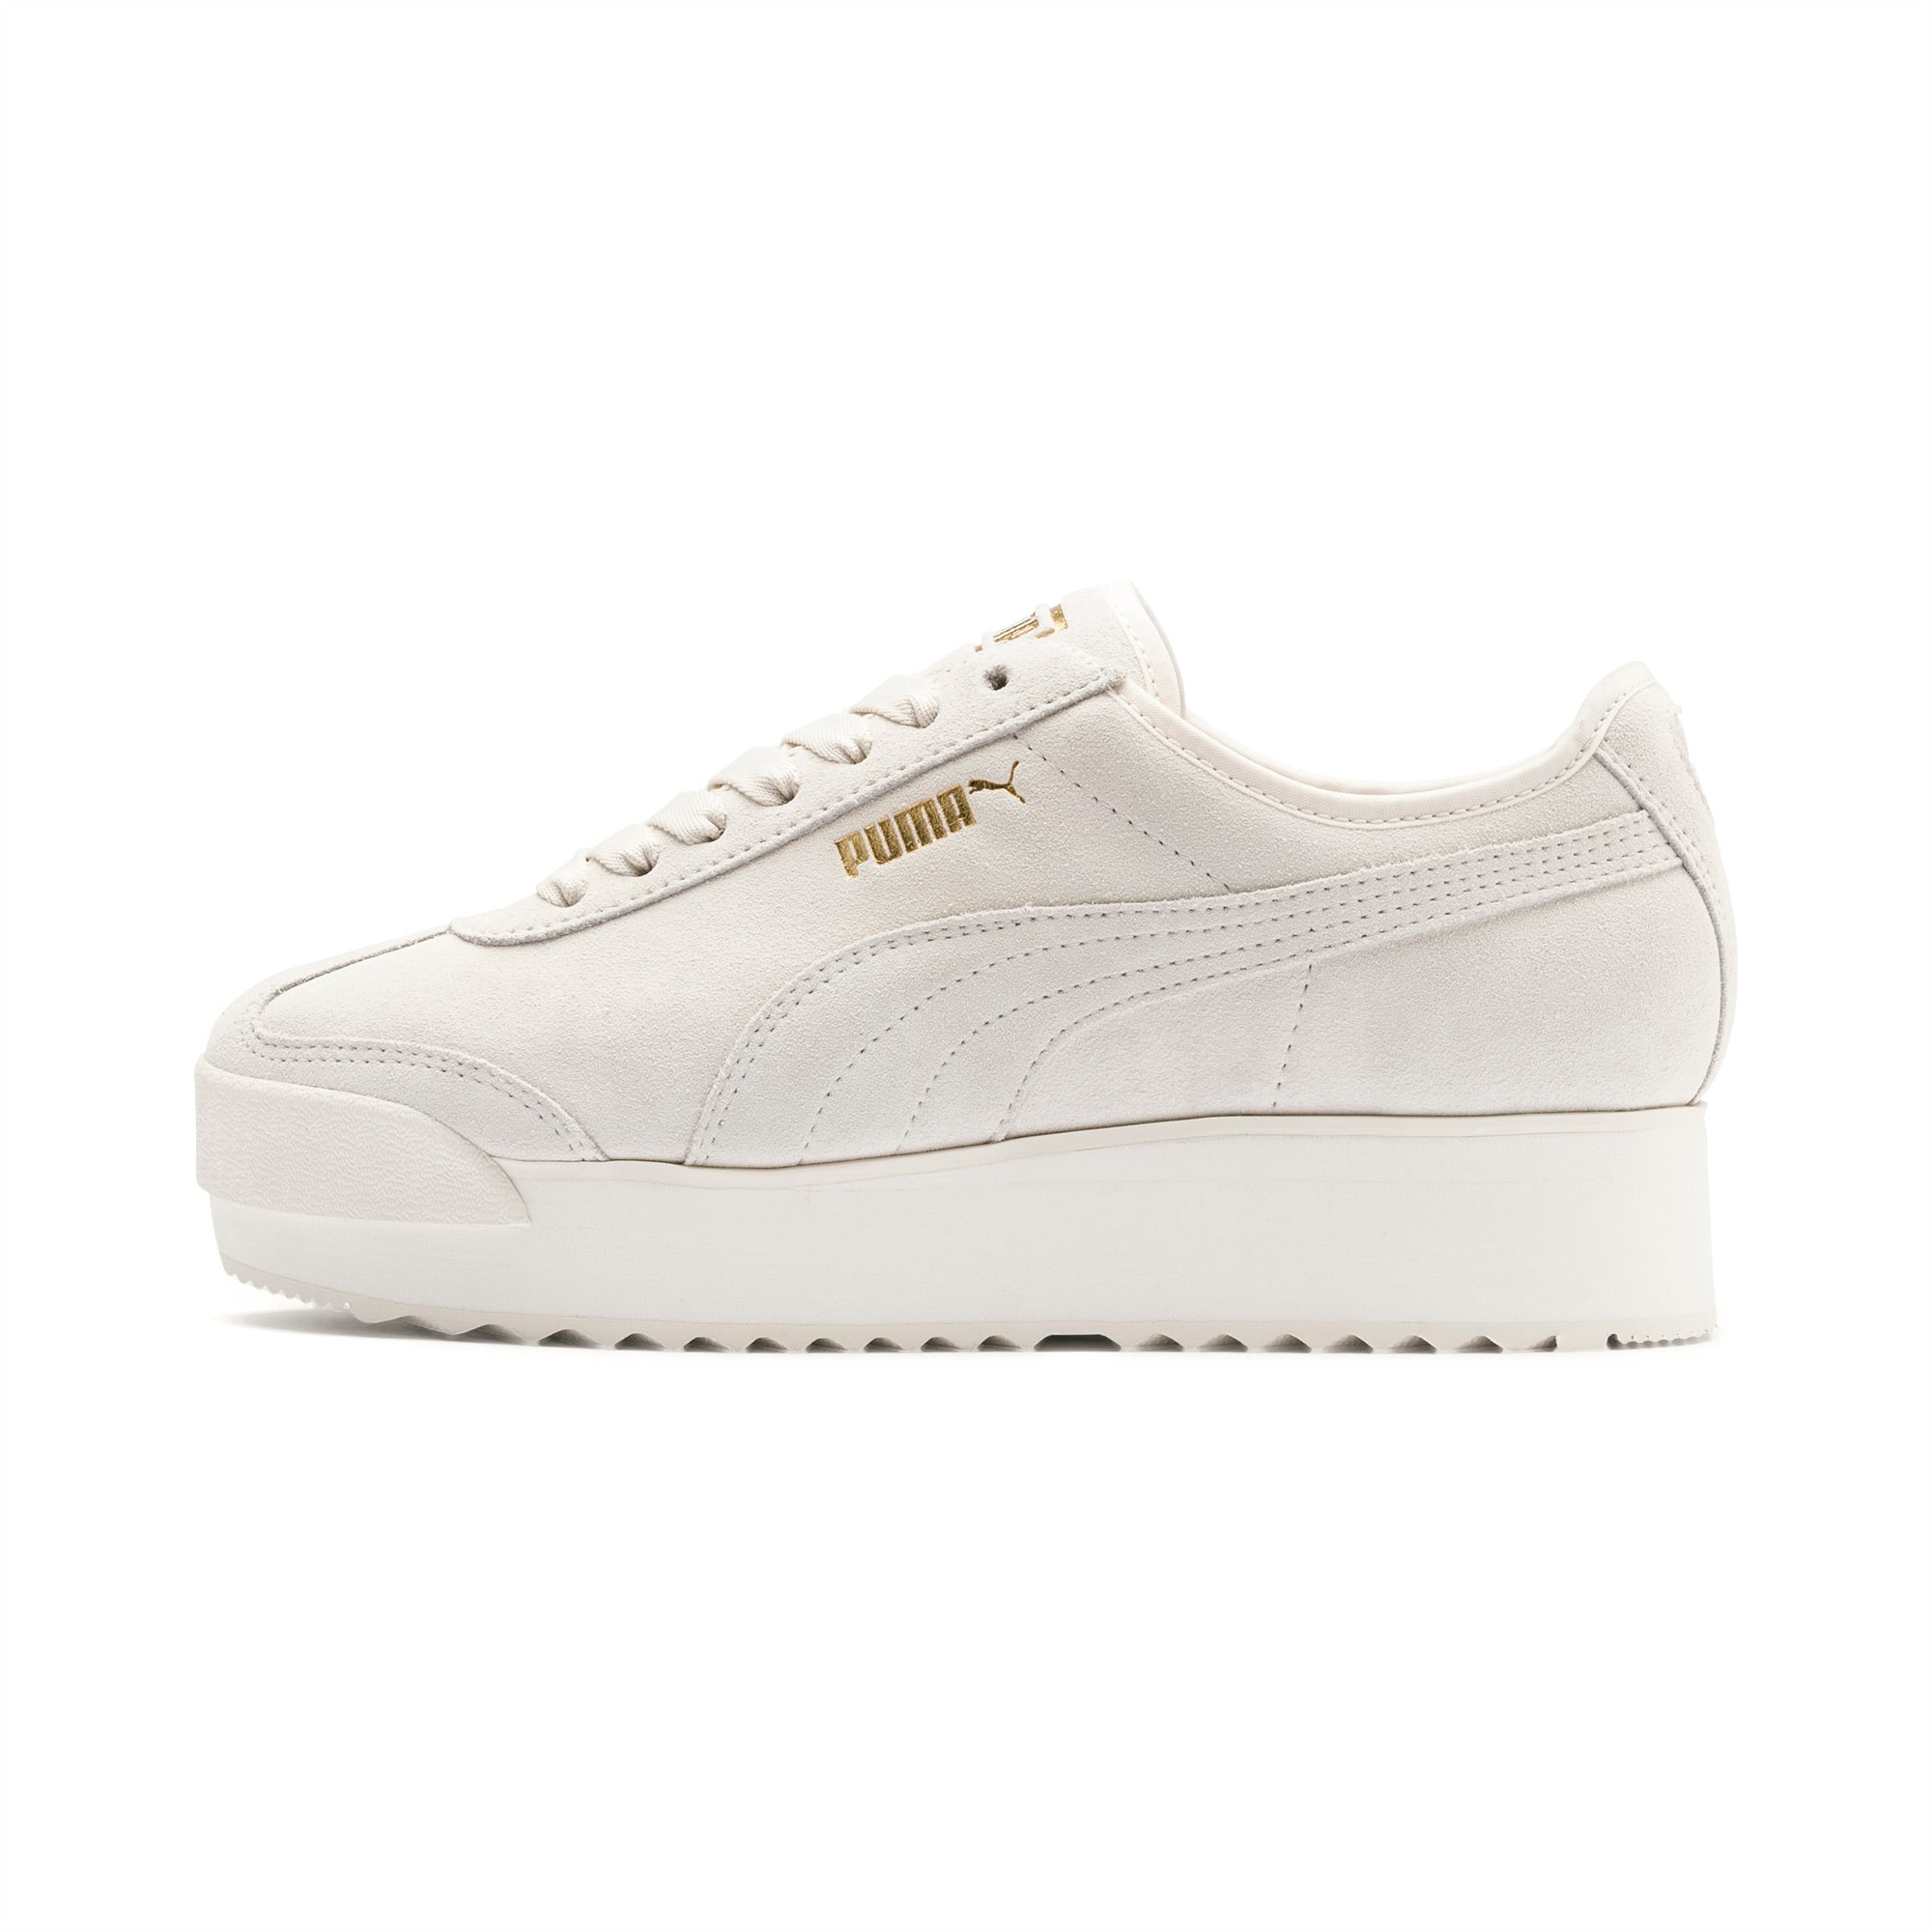 Roma Amor Suede Women's Sneakers | PUMA US